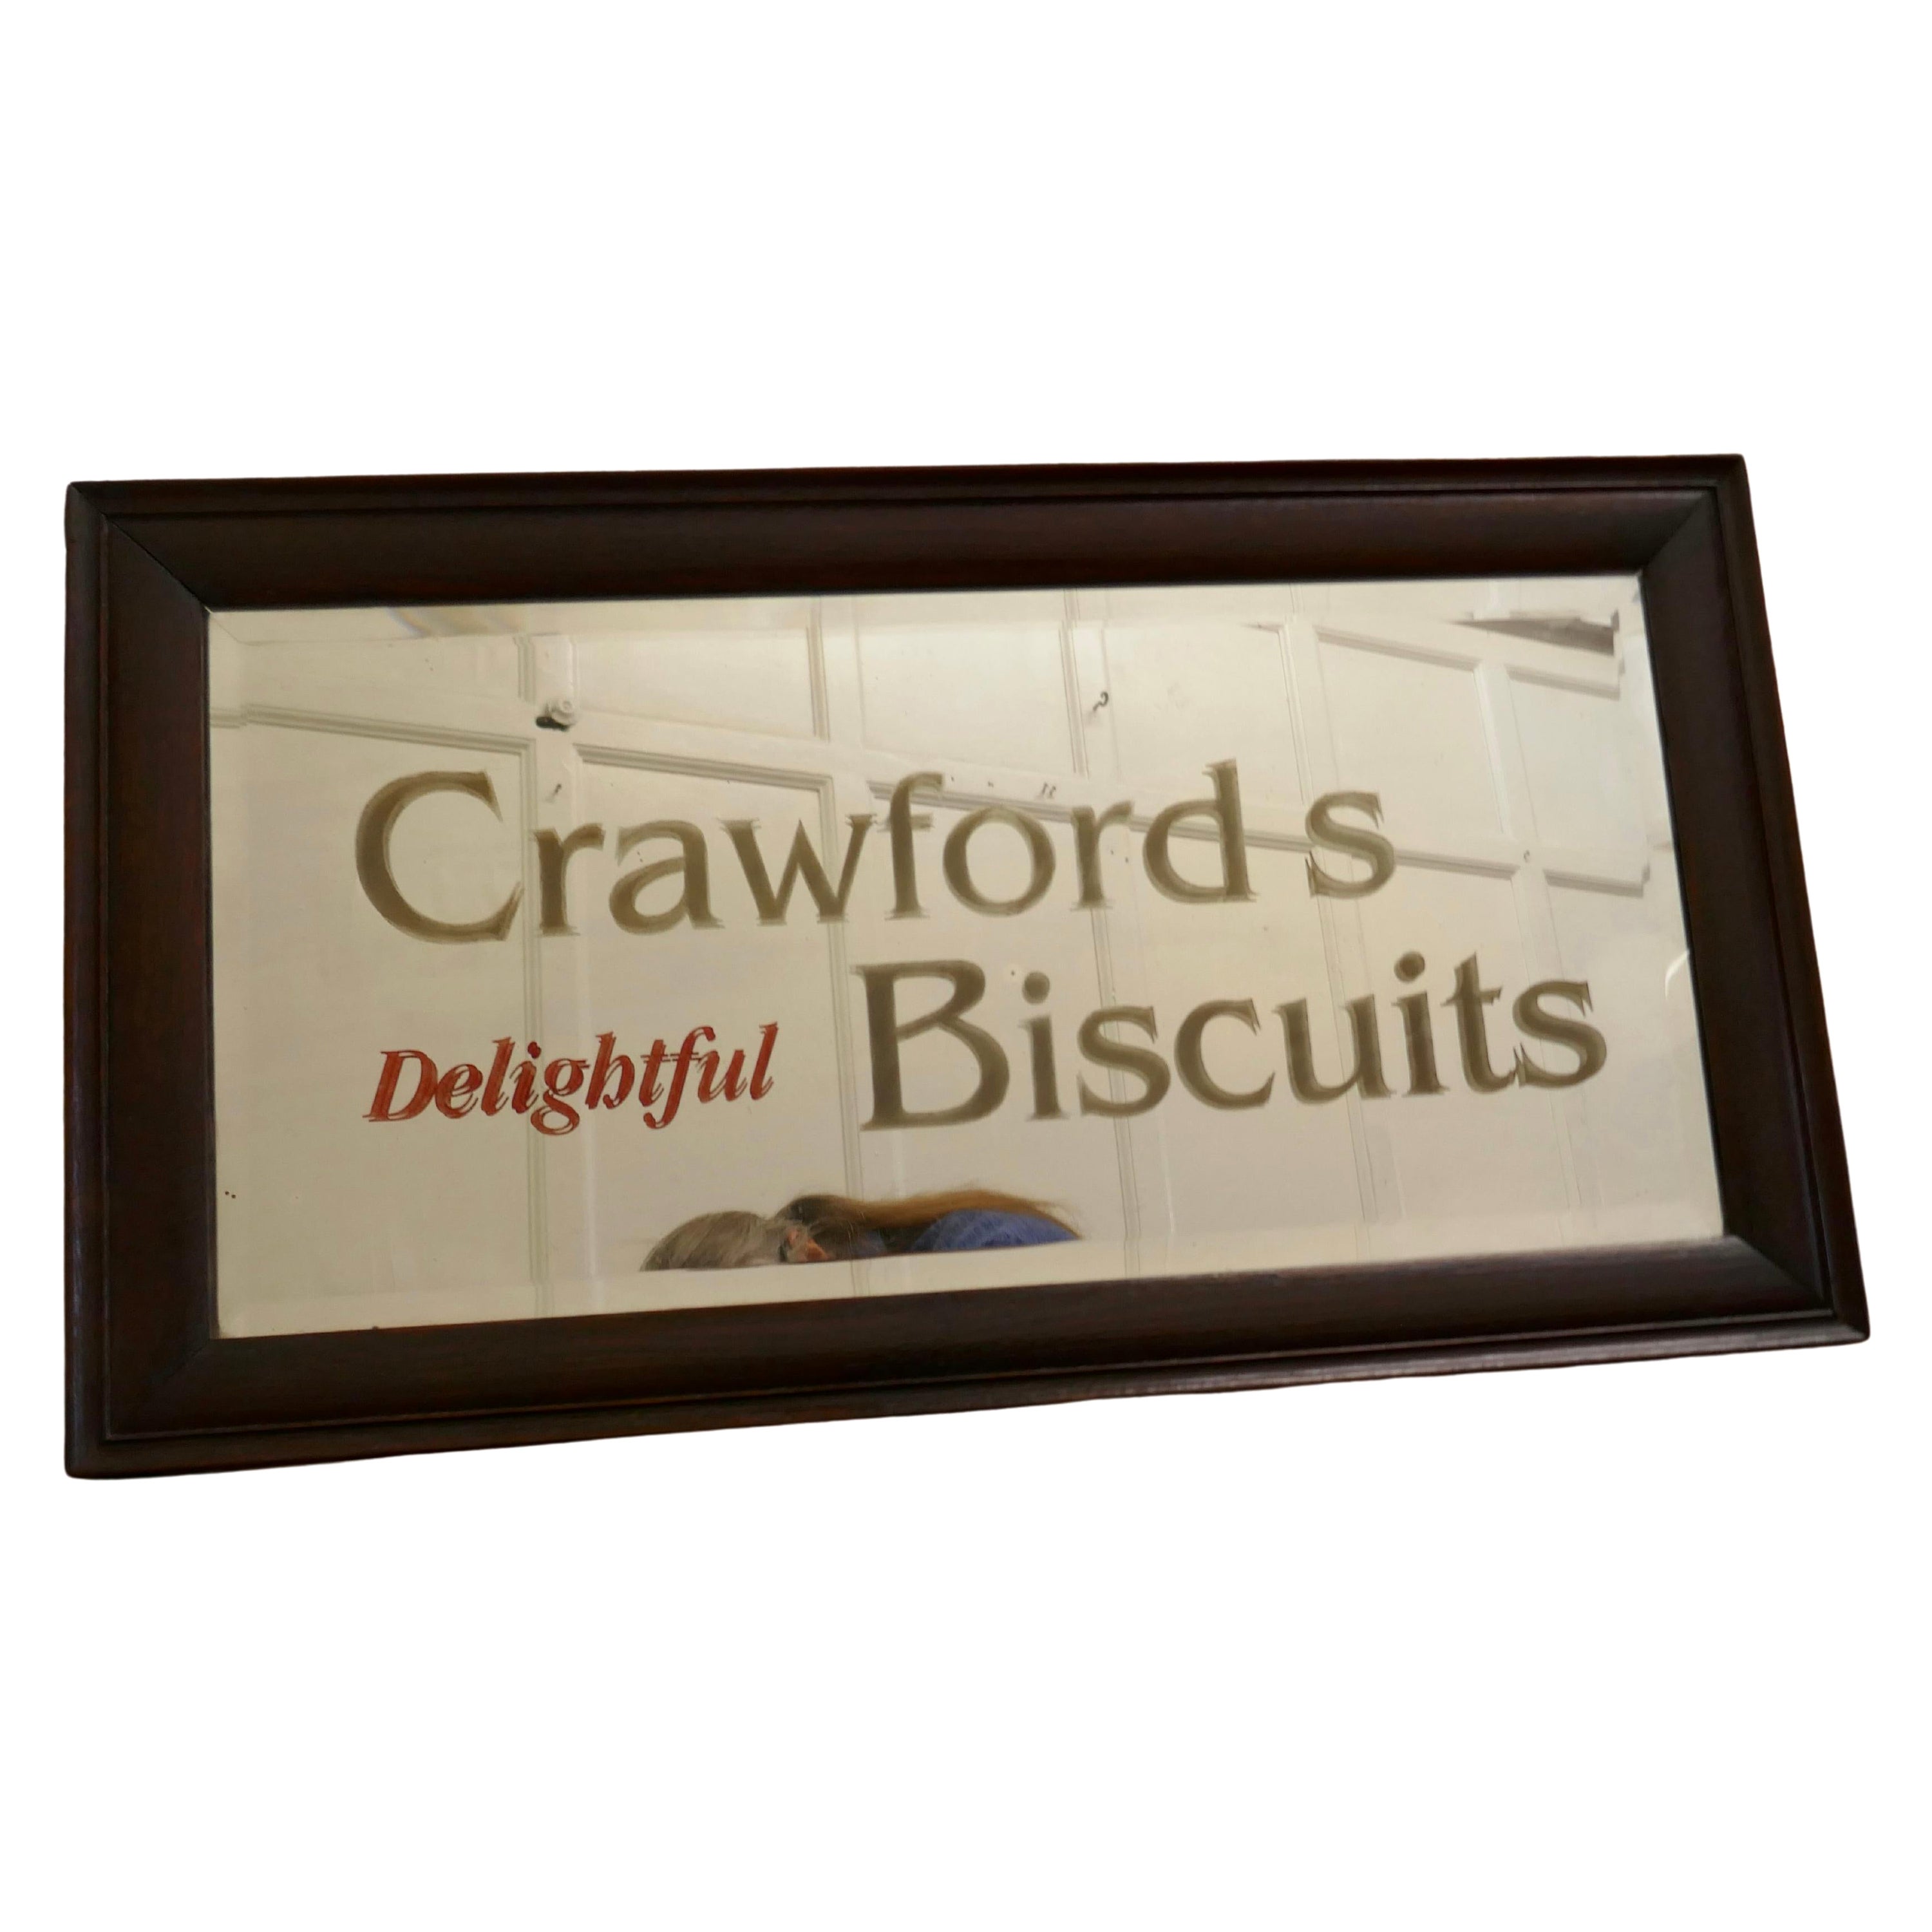 “Crawford’s Delightful Biscuits” Baker/Cafe Advertising Mirror For Sale